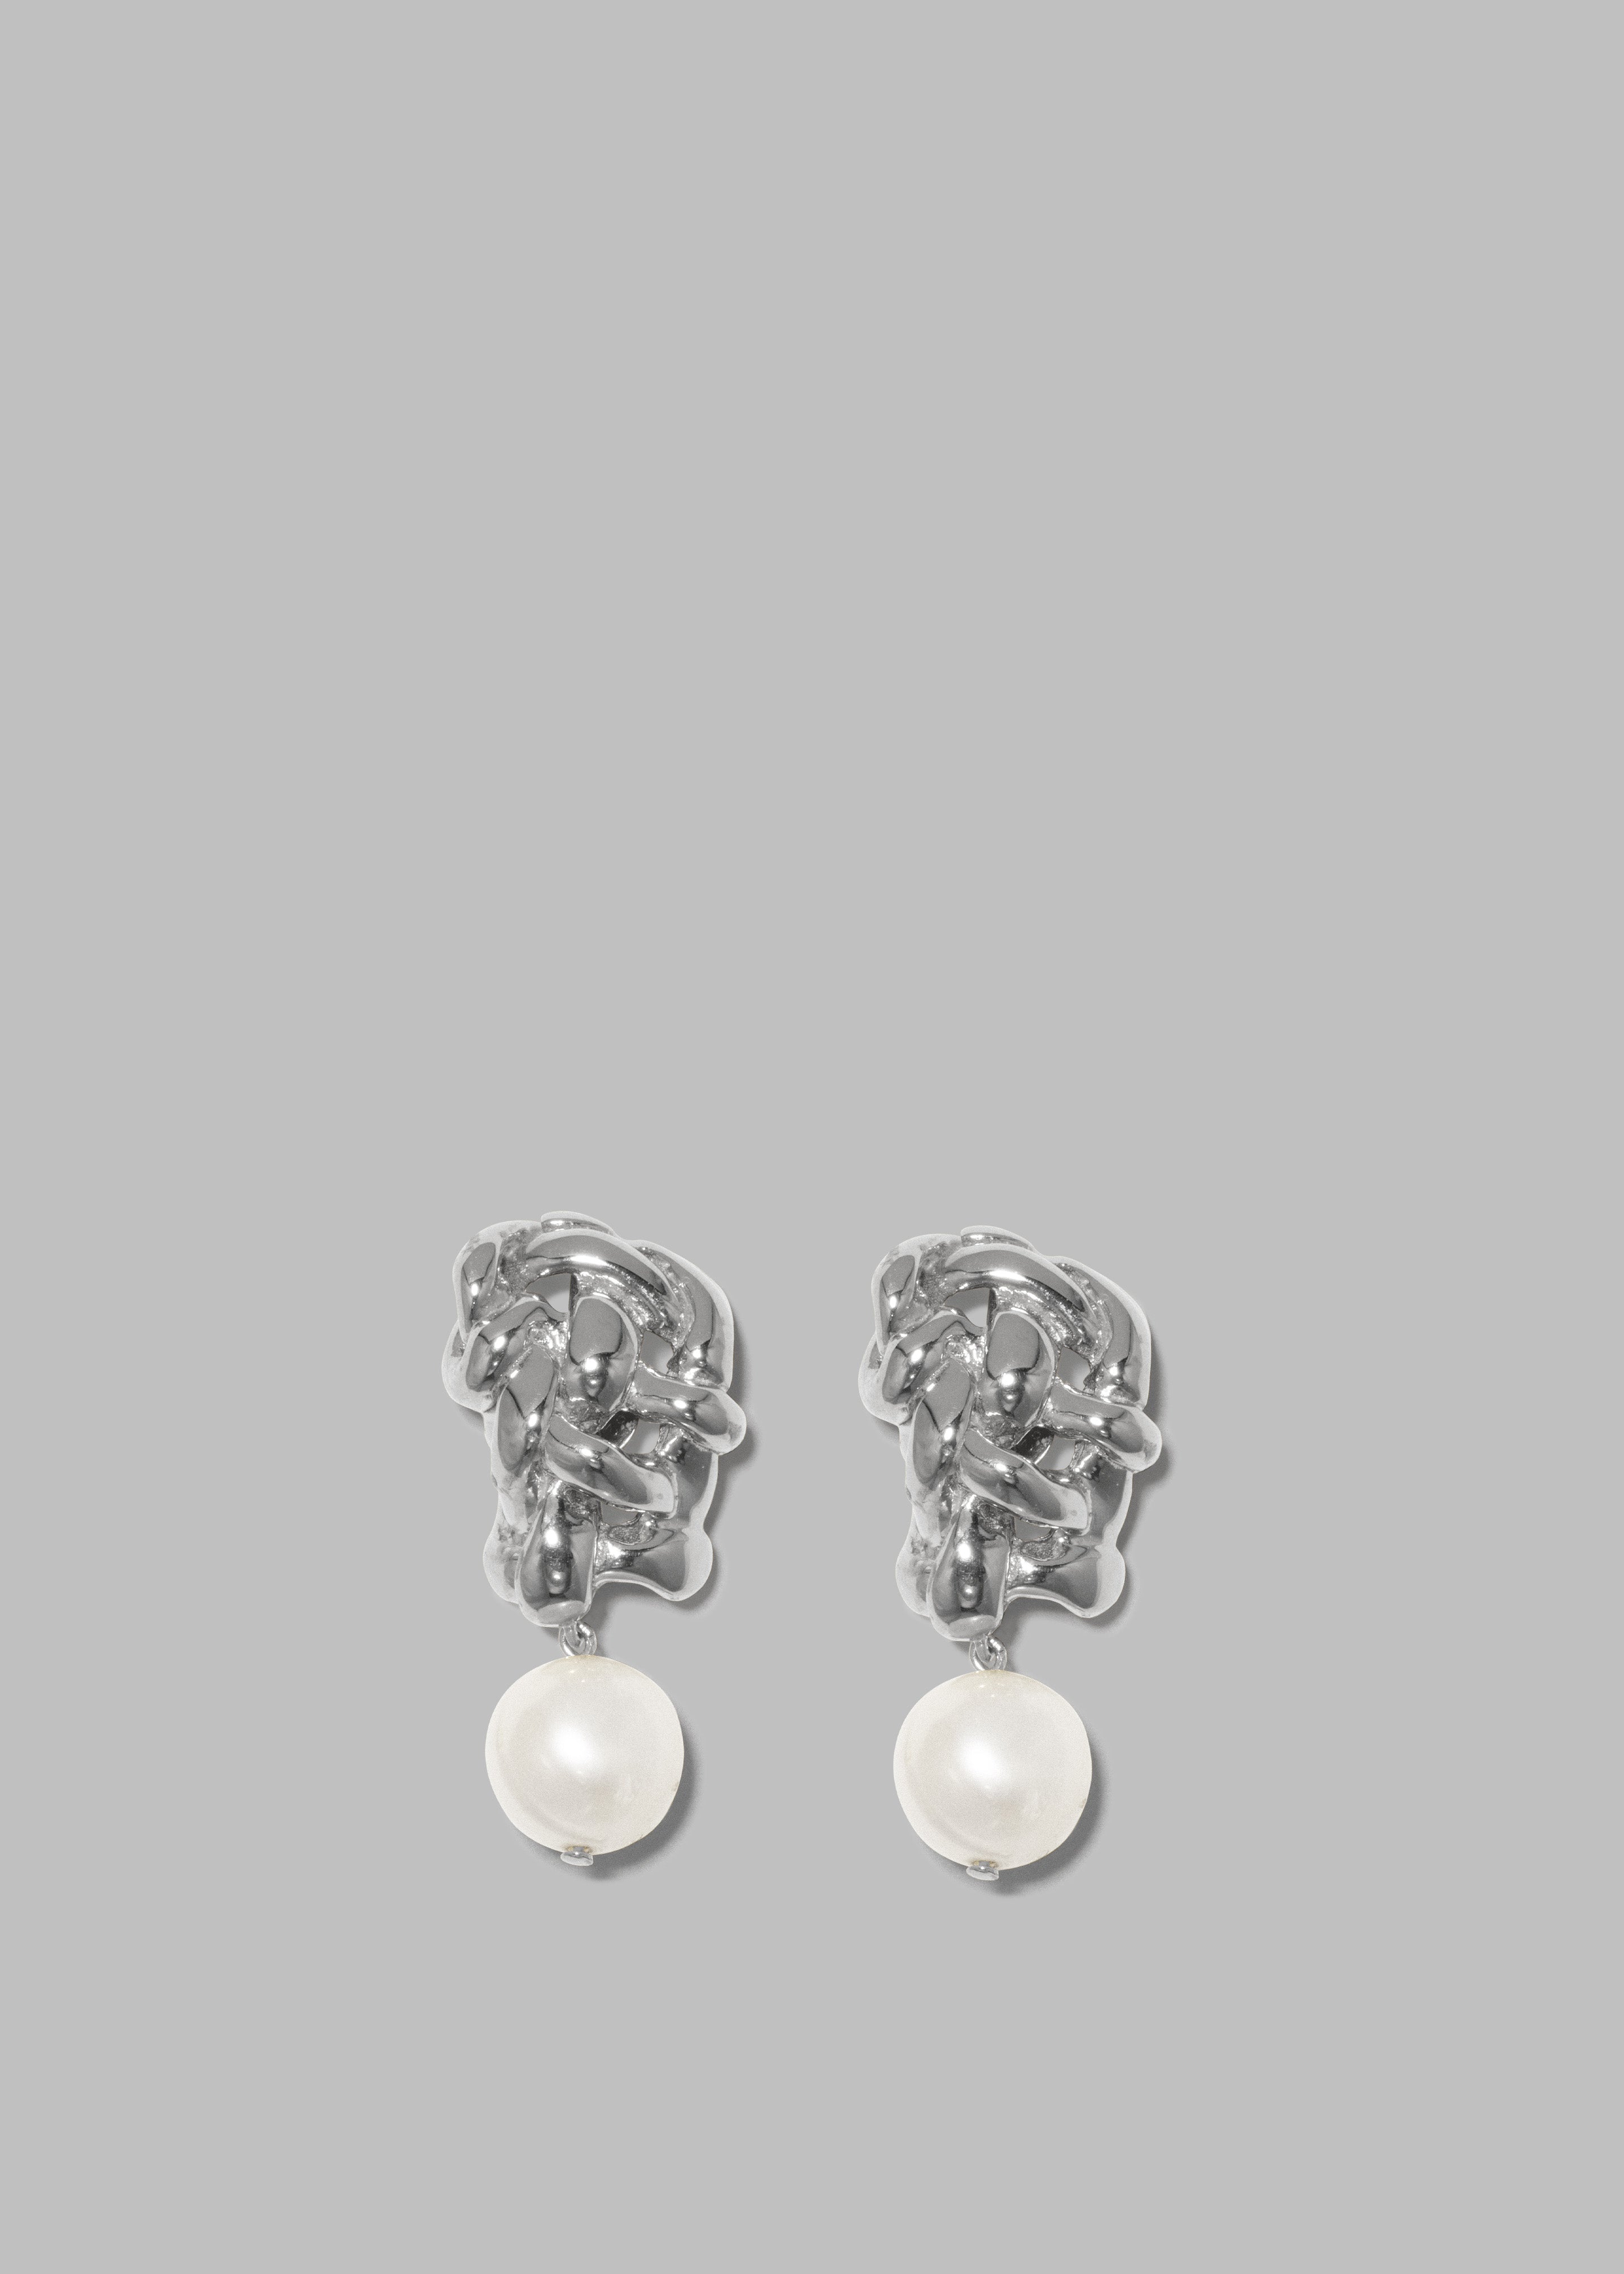 Completedworks The Paths of Memory Earrings - Pearl/Rhodium - 1